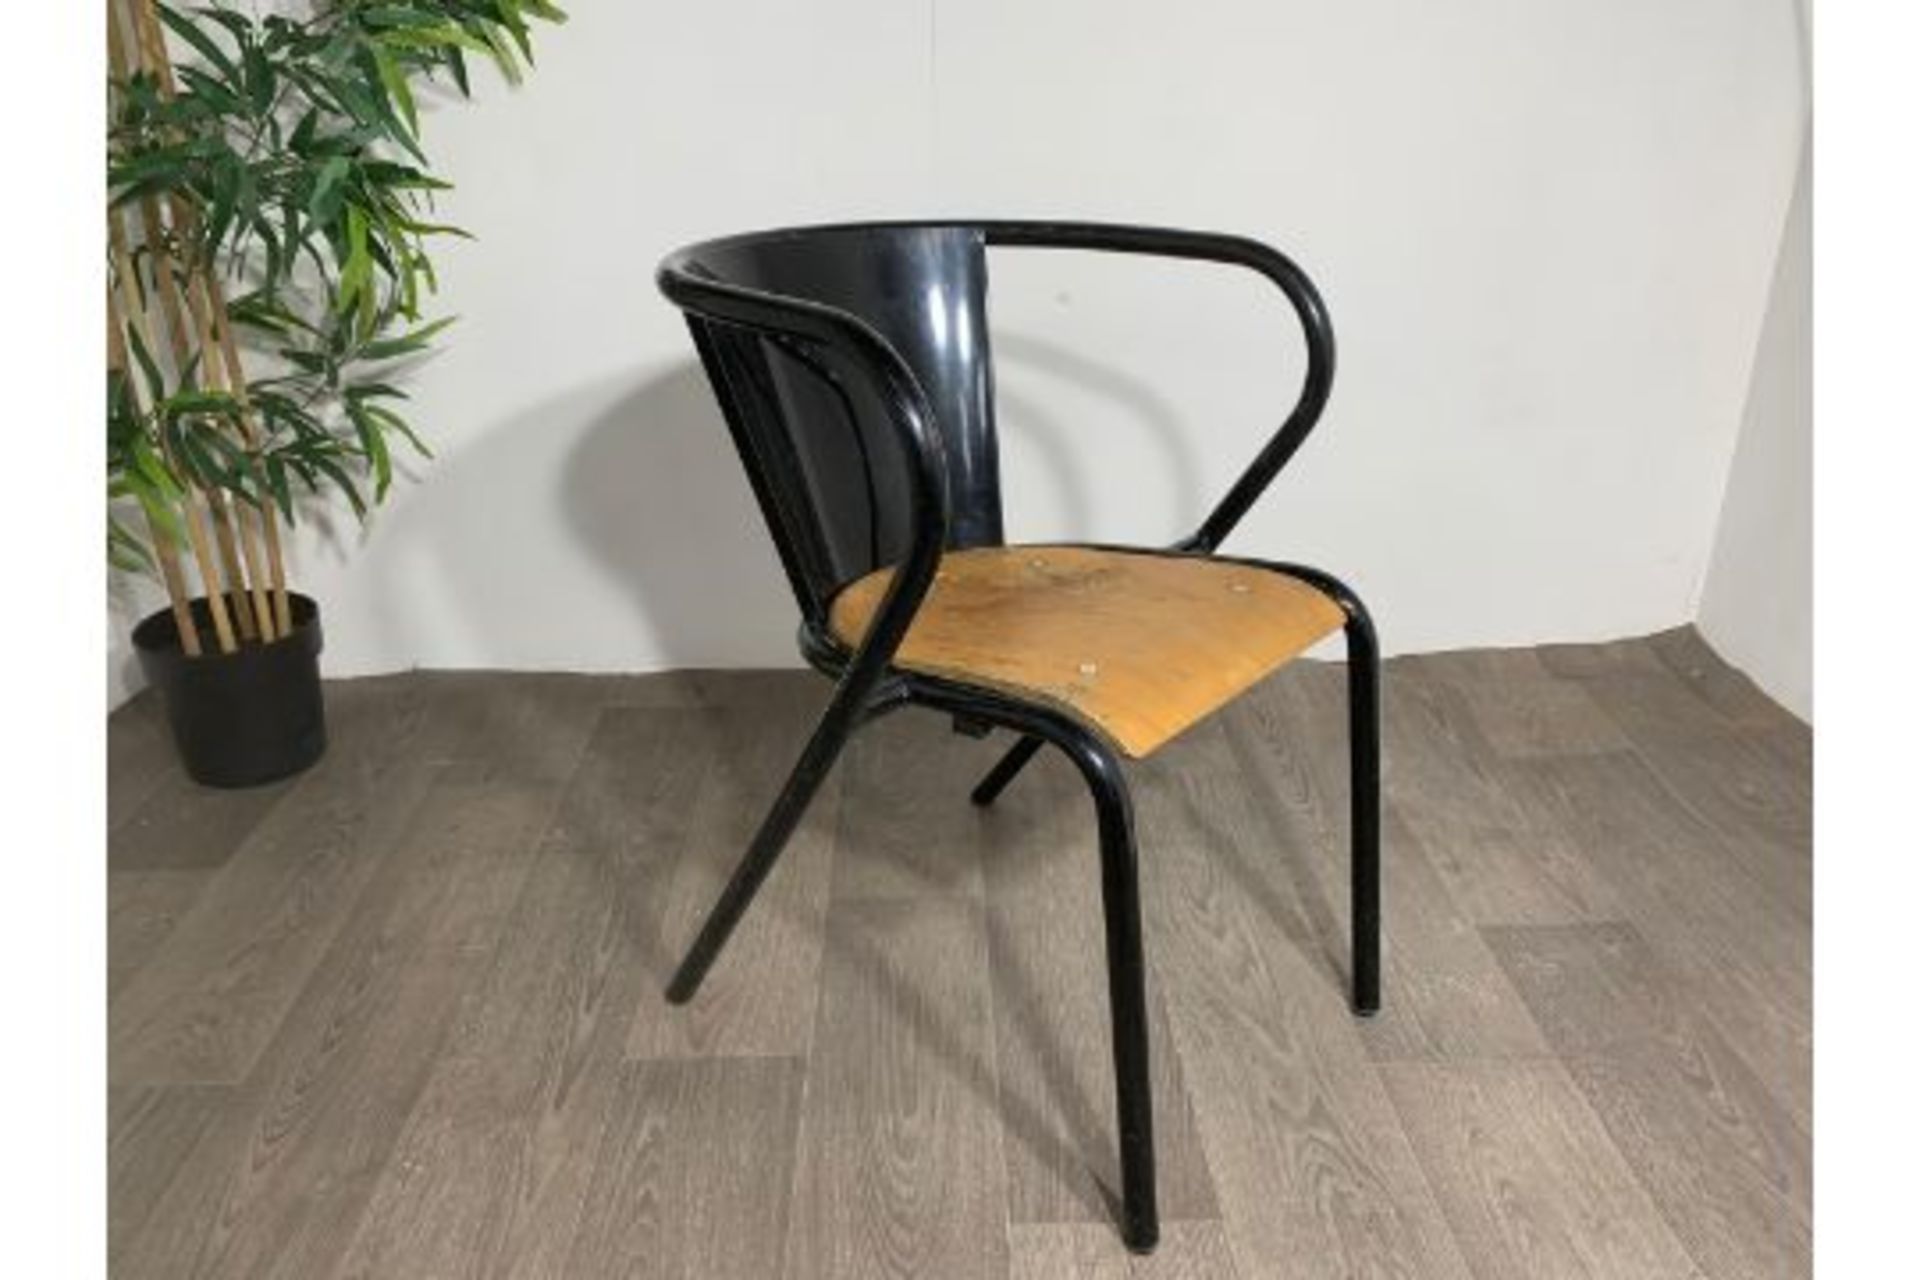 Adico 5008 Black Chair With Wooden Seat x2 - Image 2 of 7